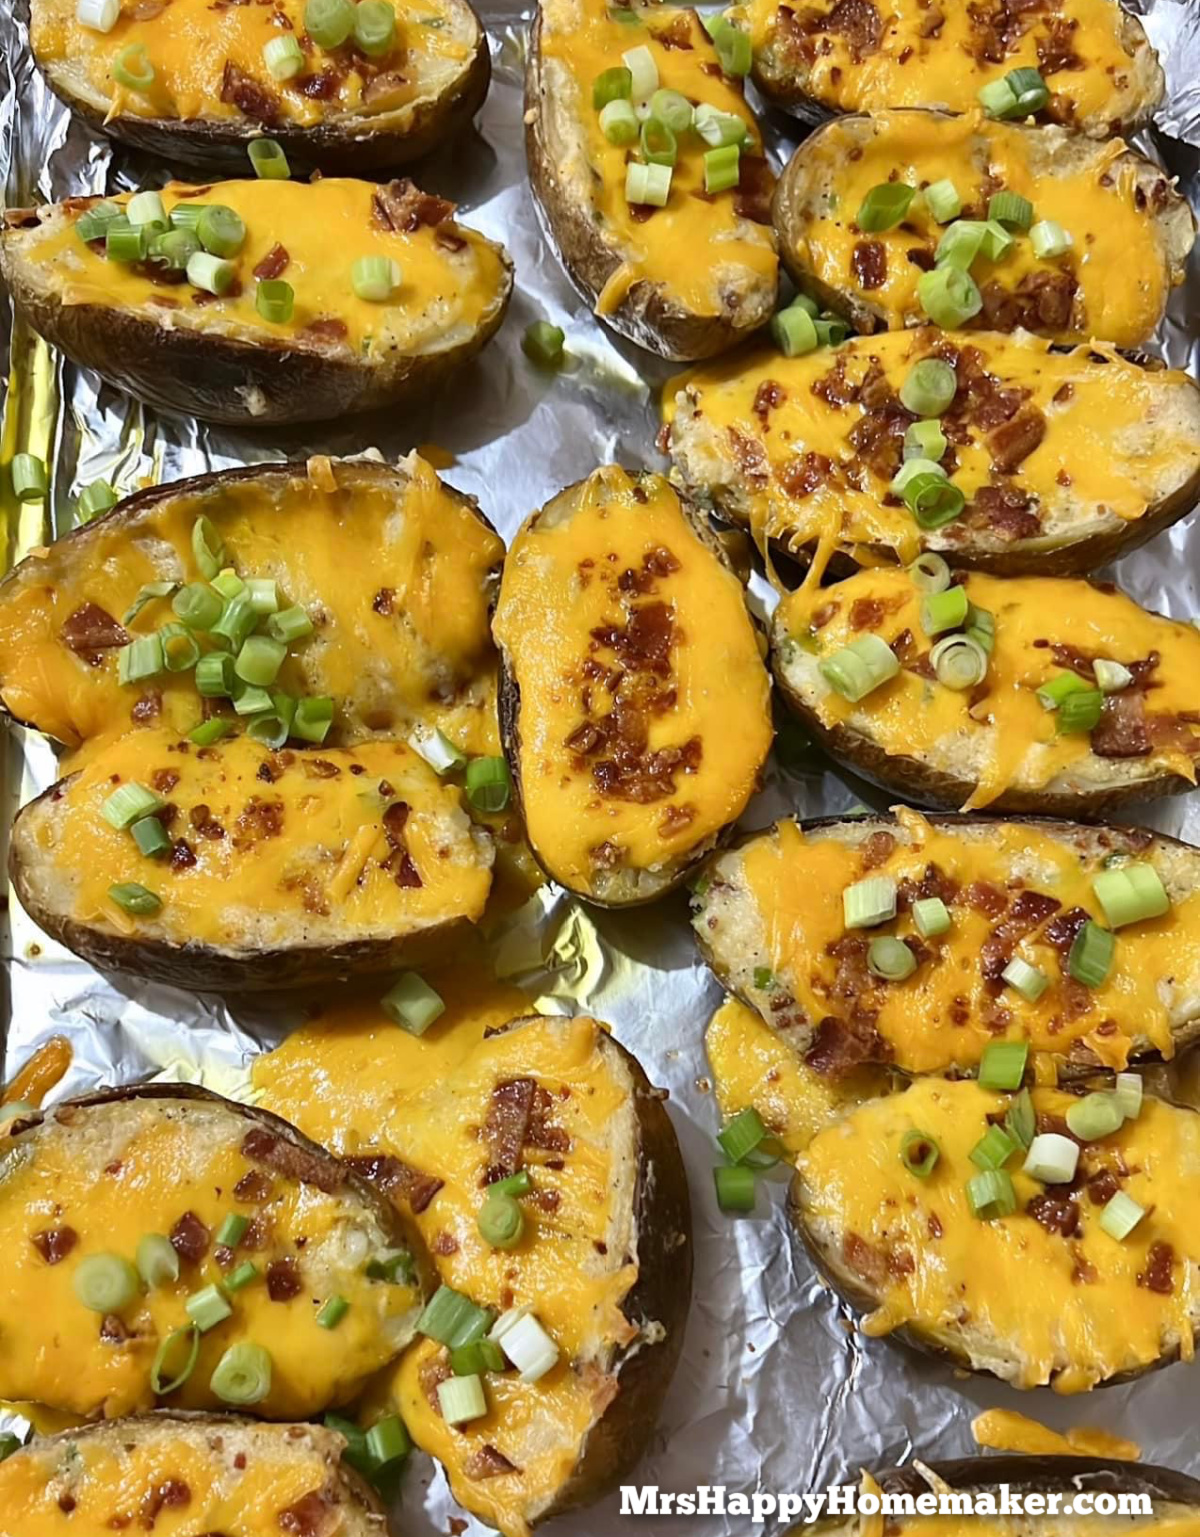 About 15 Twice Baked Stuffed Potatoes on a tinfoil lined baking sheet